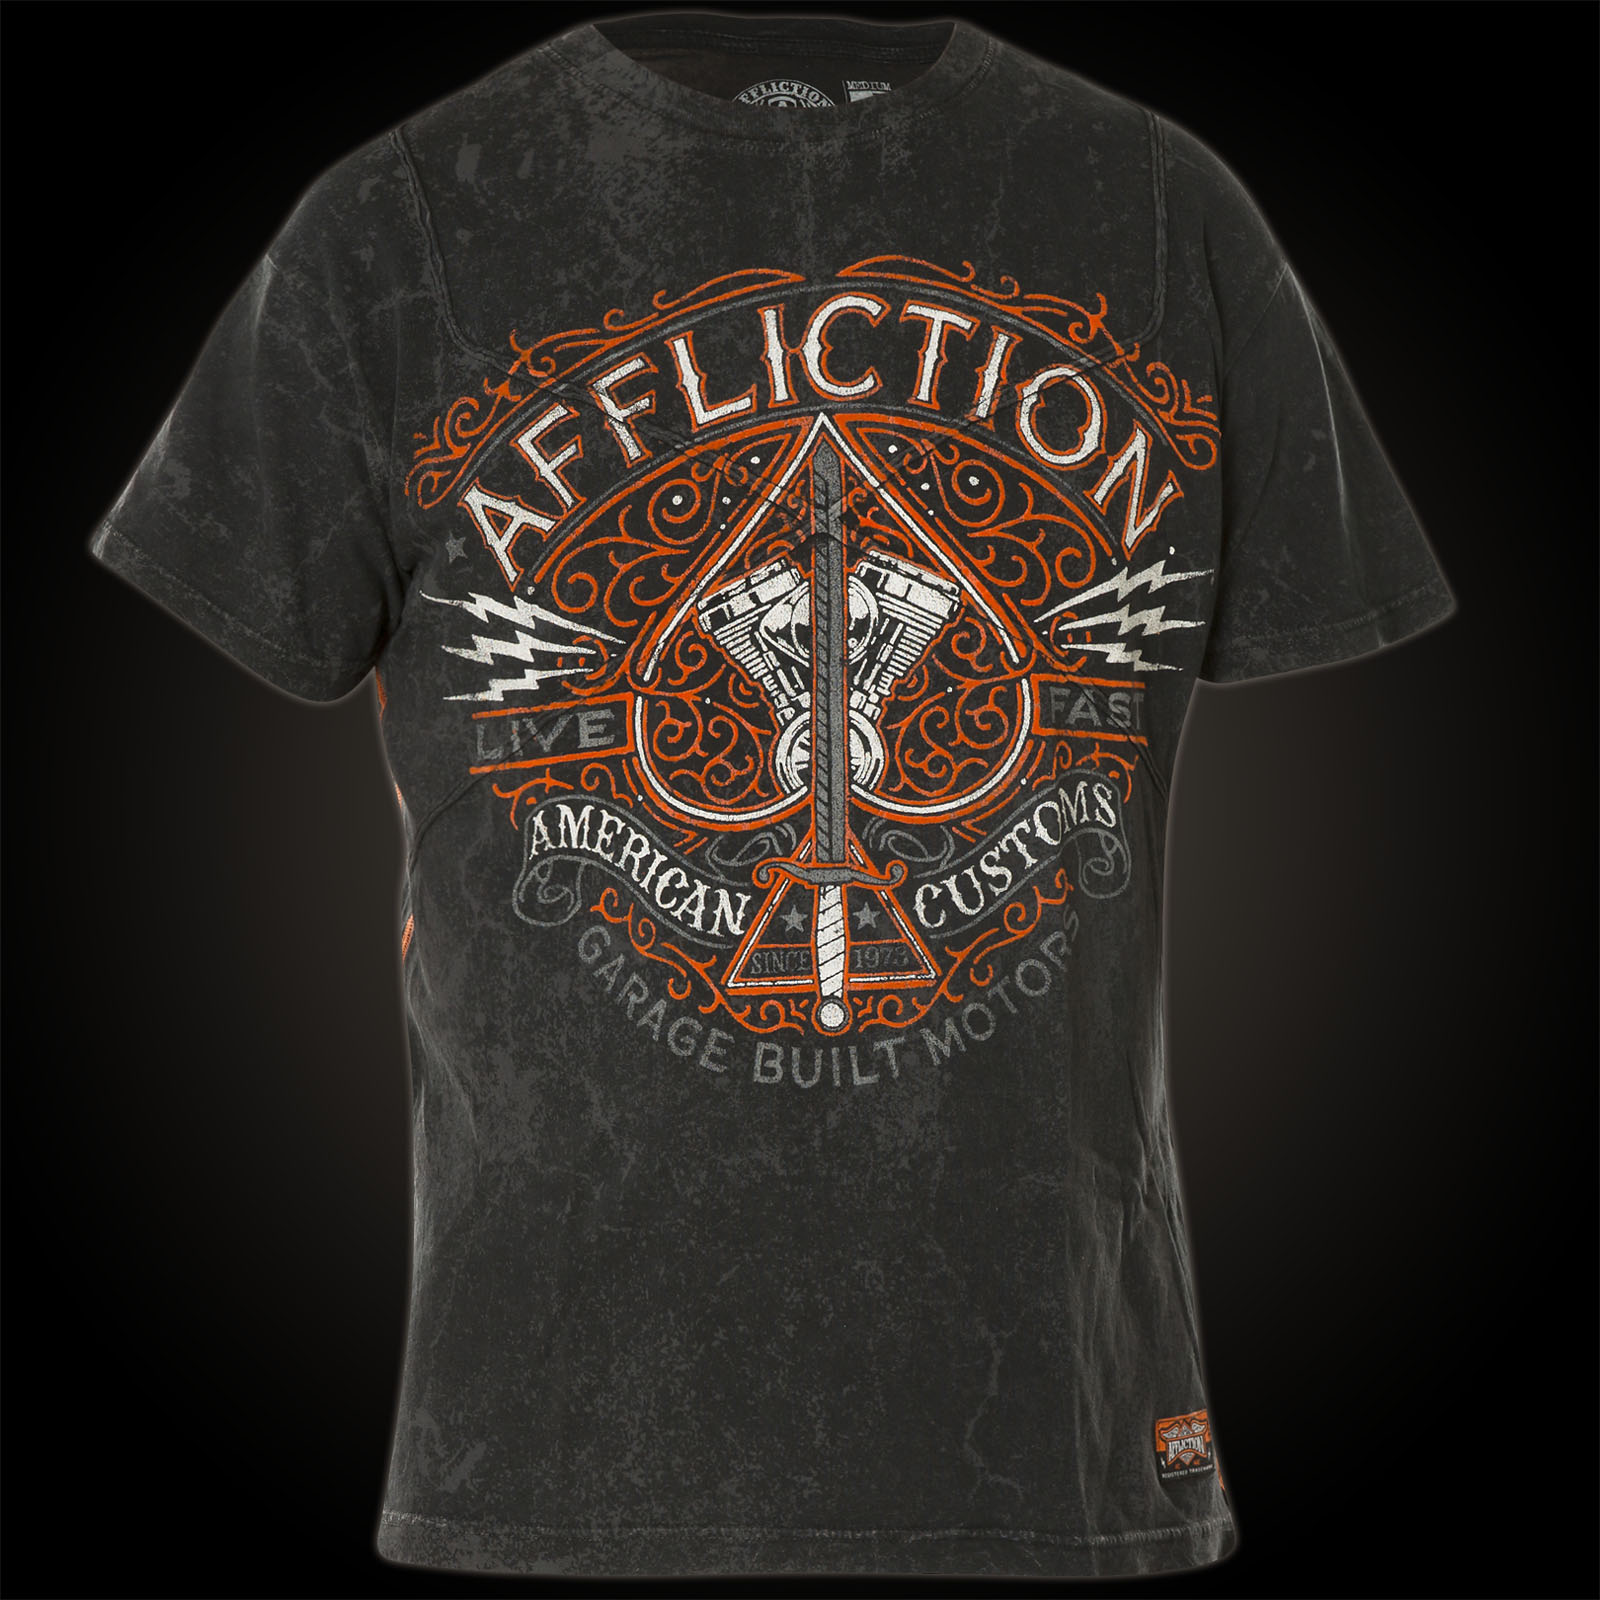 Affliction V Spade T-shirt with a decorated spade and sword